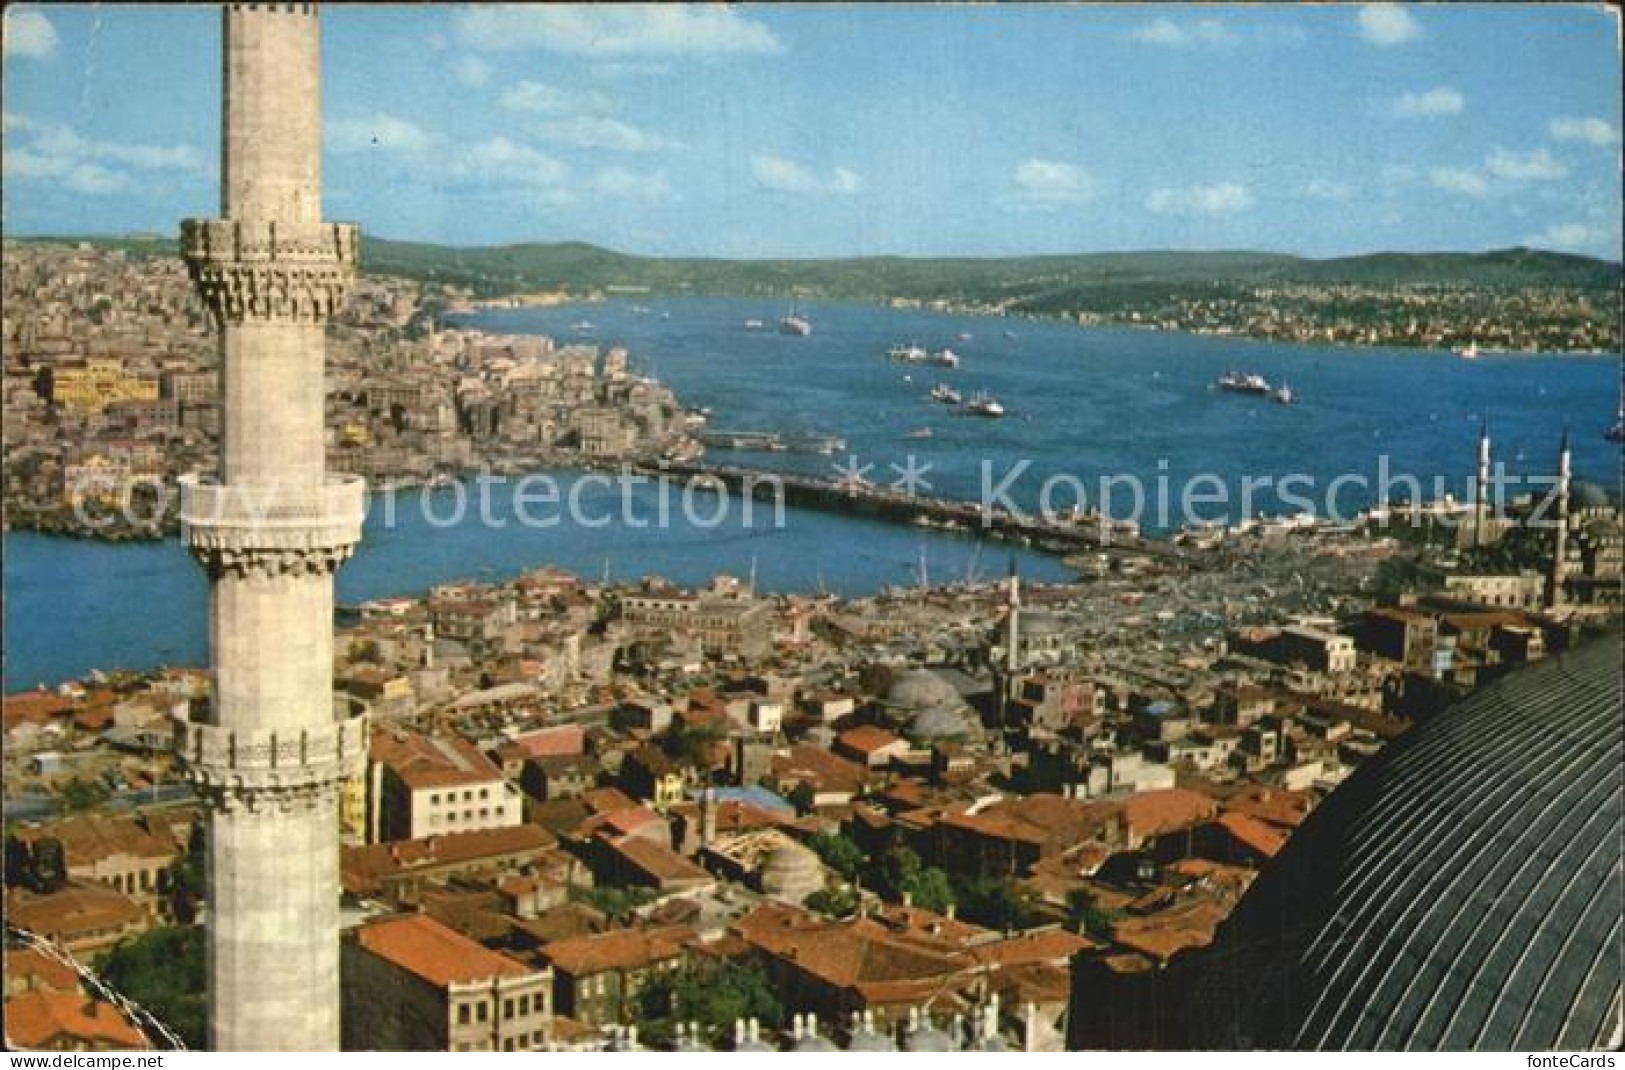 72516531 Istanbul Constantinopel View Of Golden Horn Galata Bridge And The Bosph - Turquie